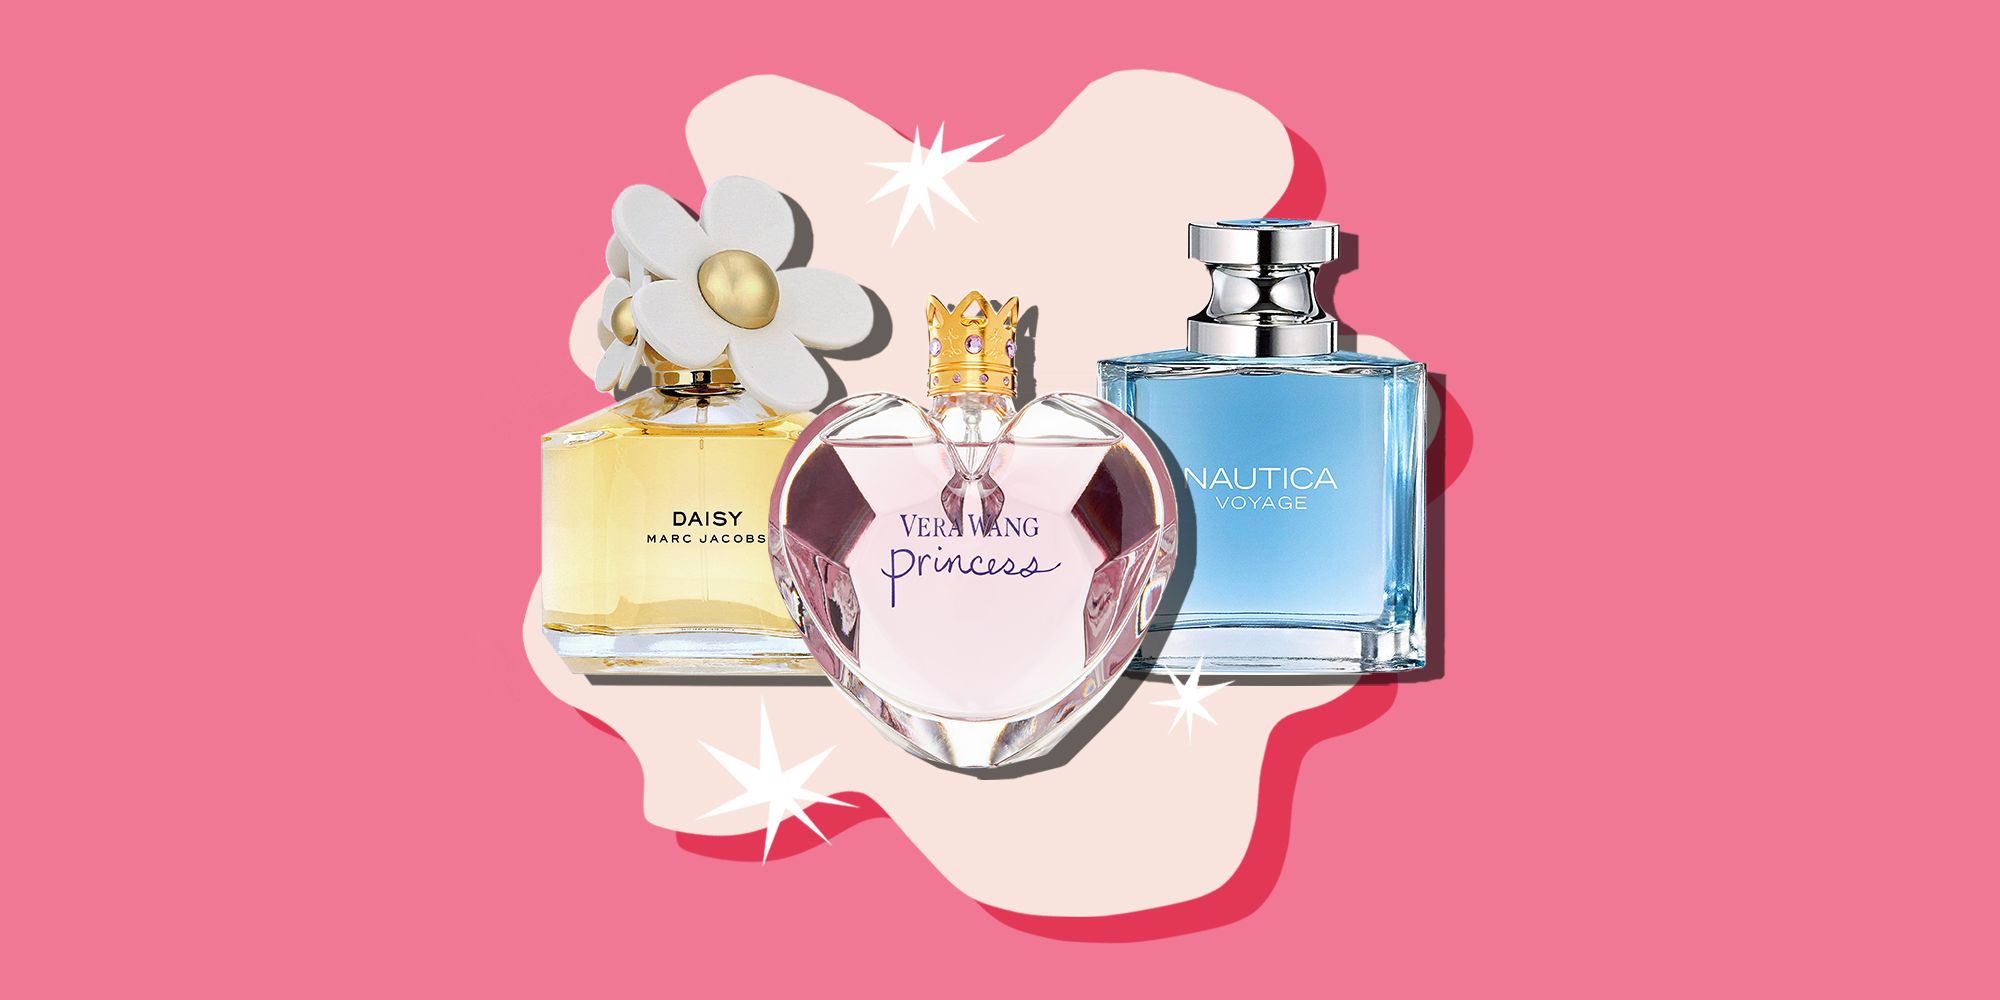 14 Best Perfumes for Teens in 2020 